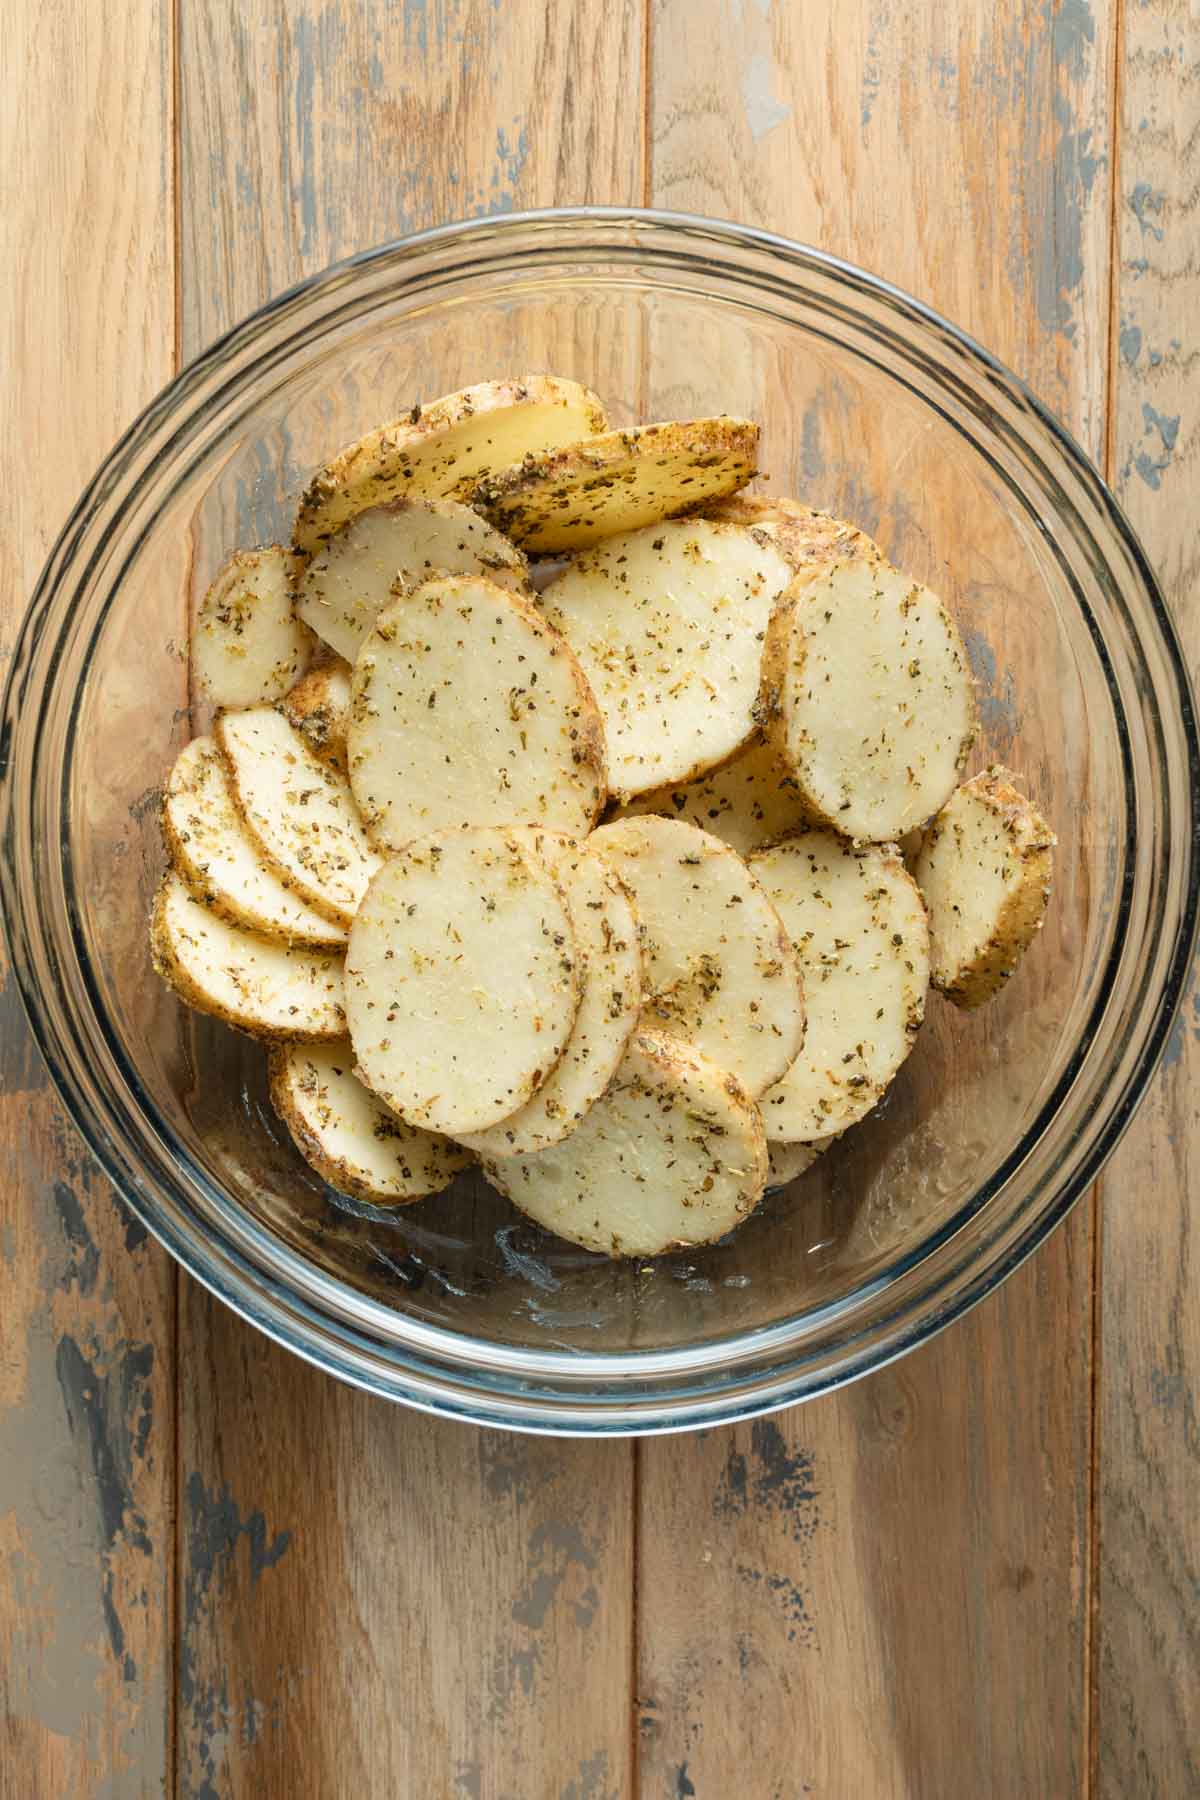 Seasoned potato slices in a large glass bowl.